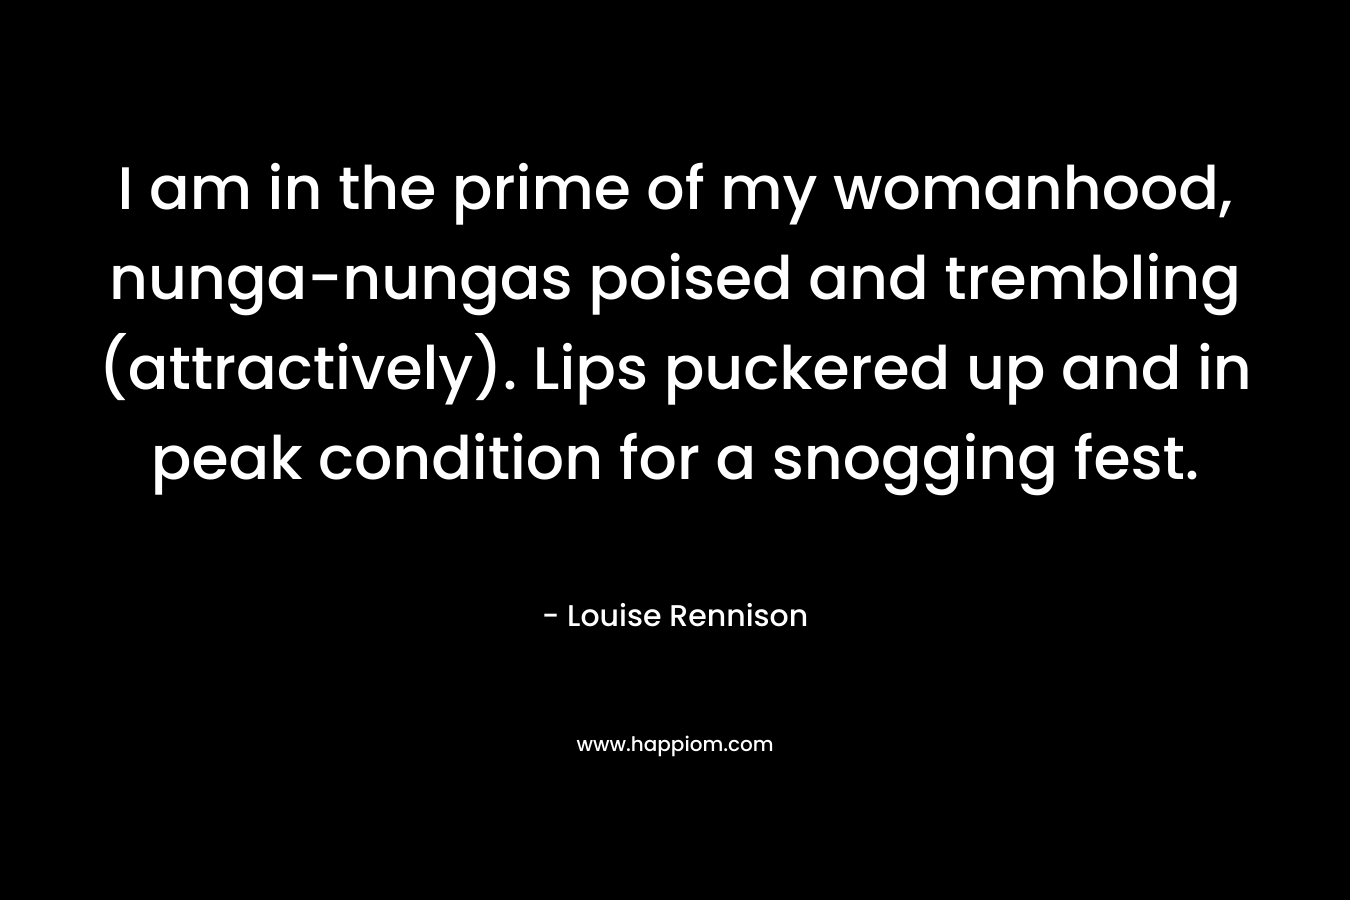 I am in the prime of my womanhood, nunga-nungas poised and trembling (attractively). Lips puckered up and in peak condition for a snogging fest. – Louise Rennison